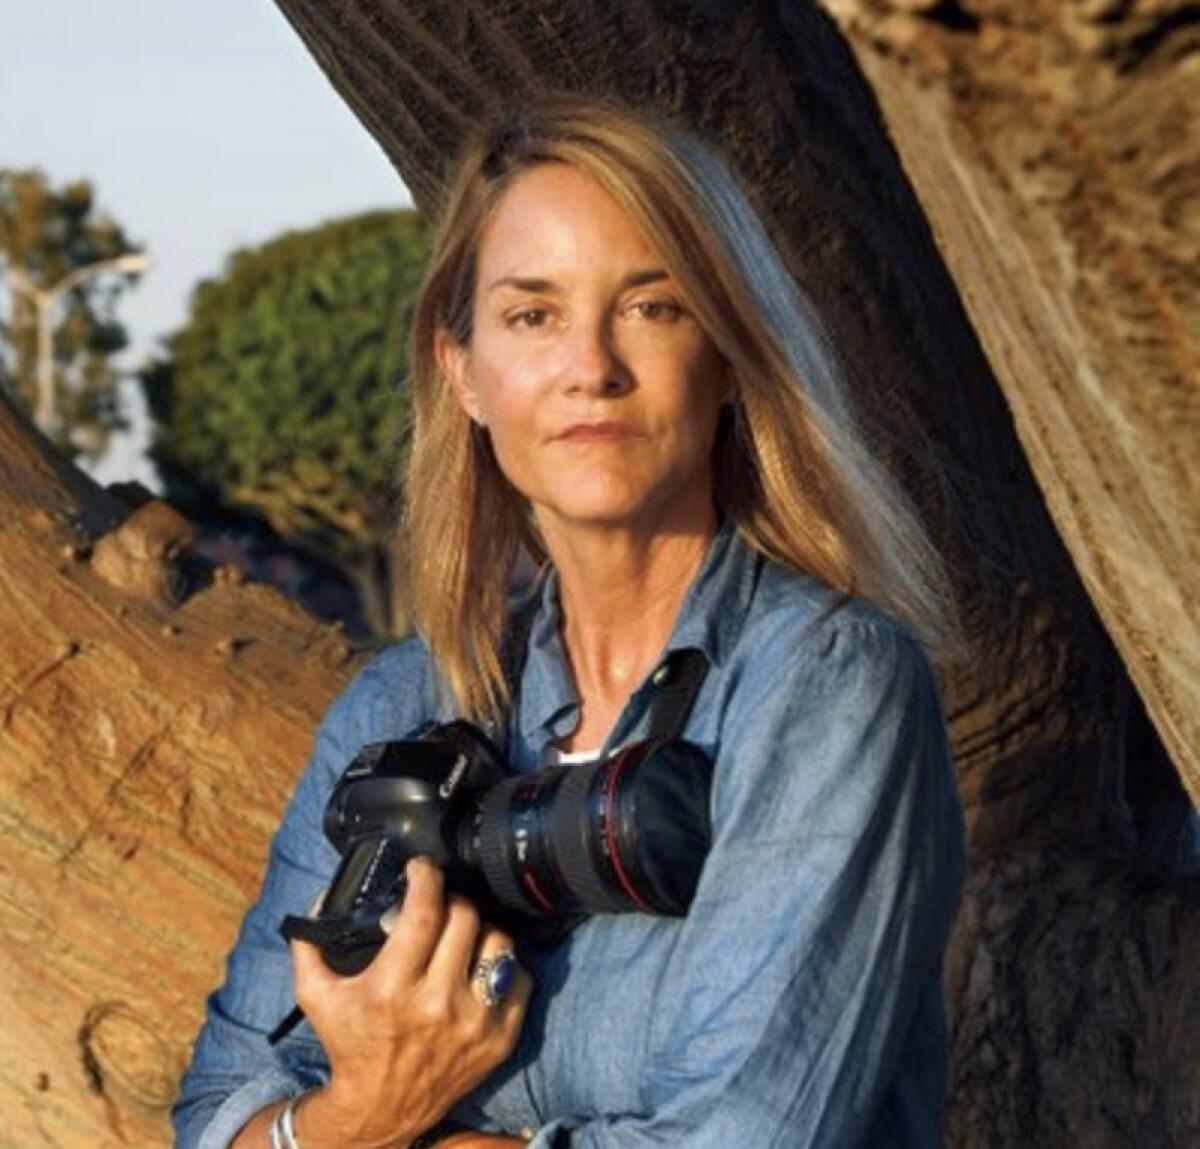 Los Angeles Times staff photographer Carolyn Cole.